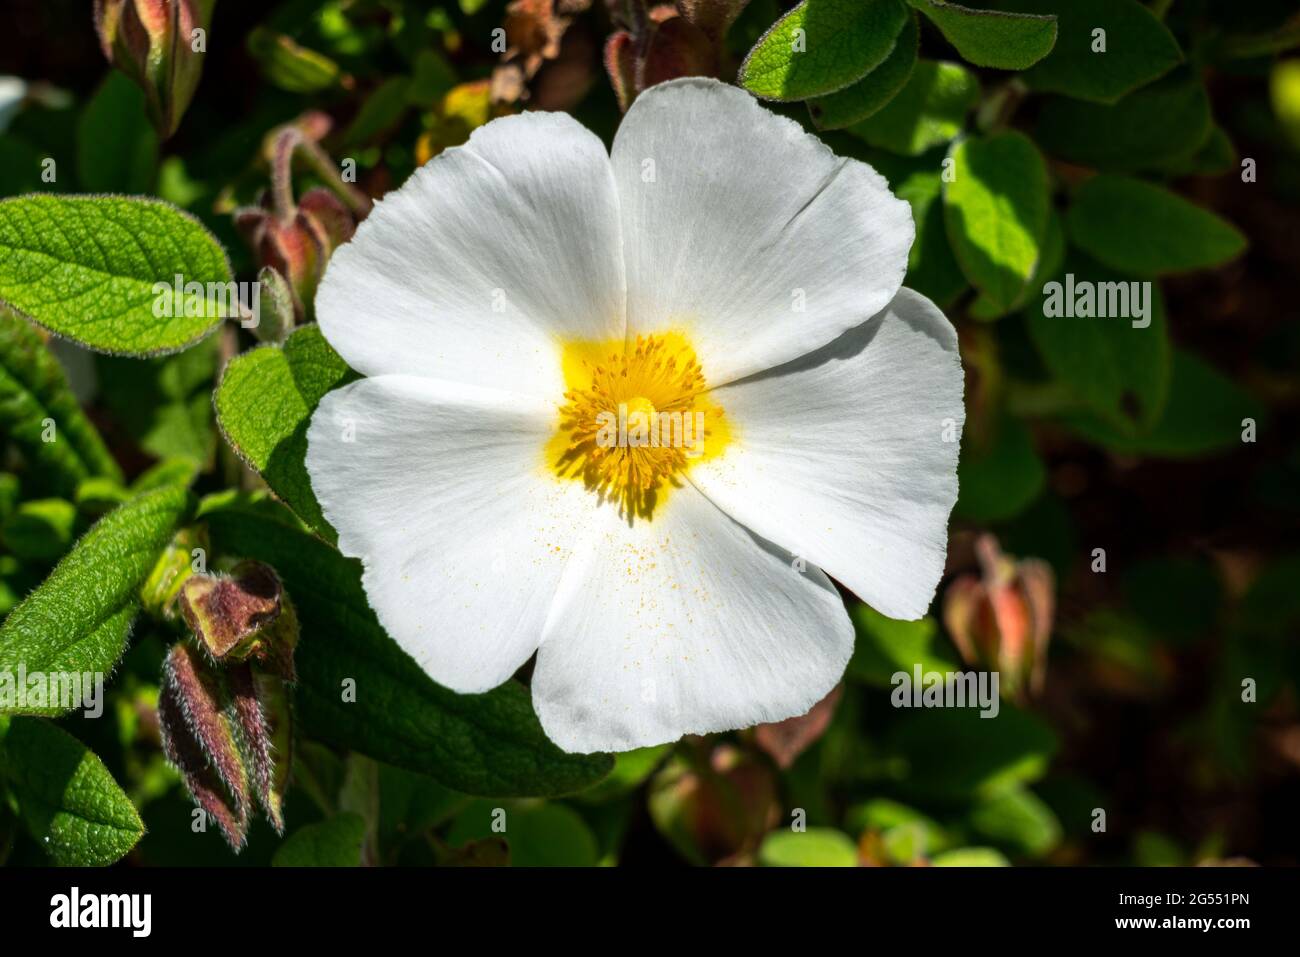 Cistus x corbariensis a summer flowering compact shrub plant with a white summertime flower commonly known as rock rose, stock photo image Stock Photo